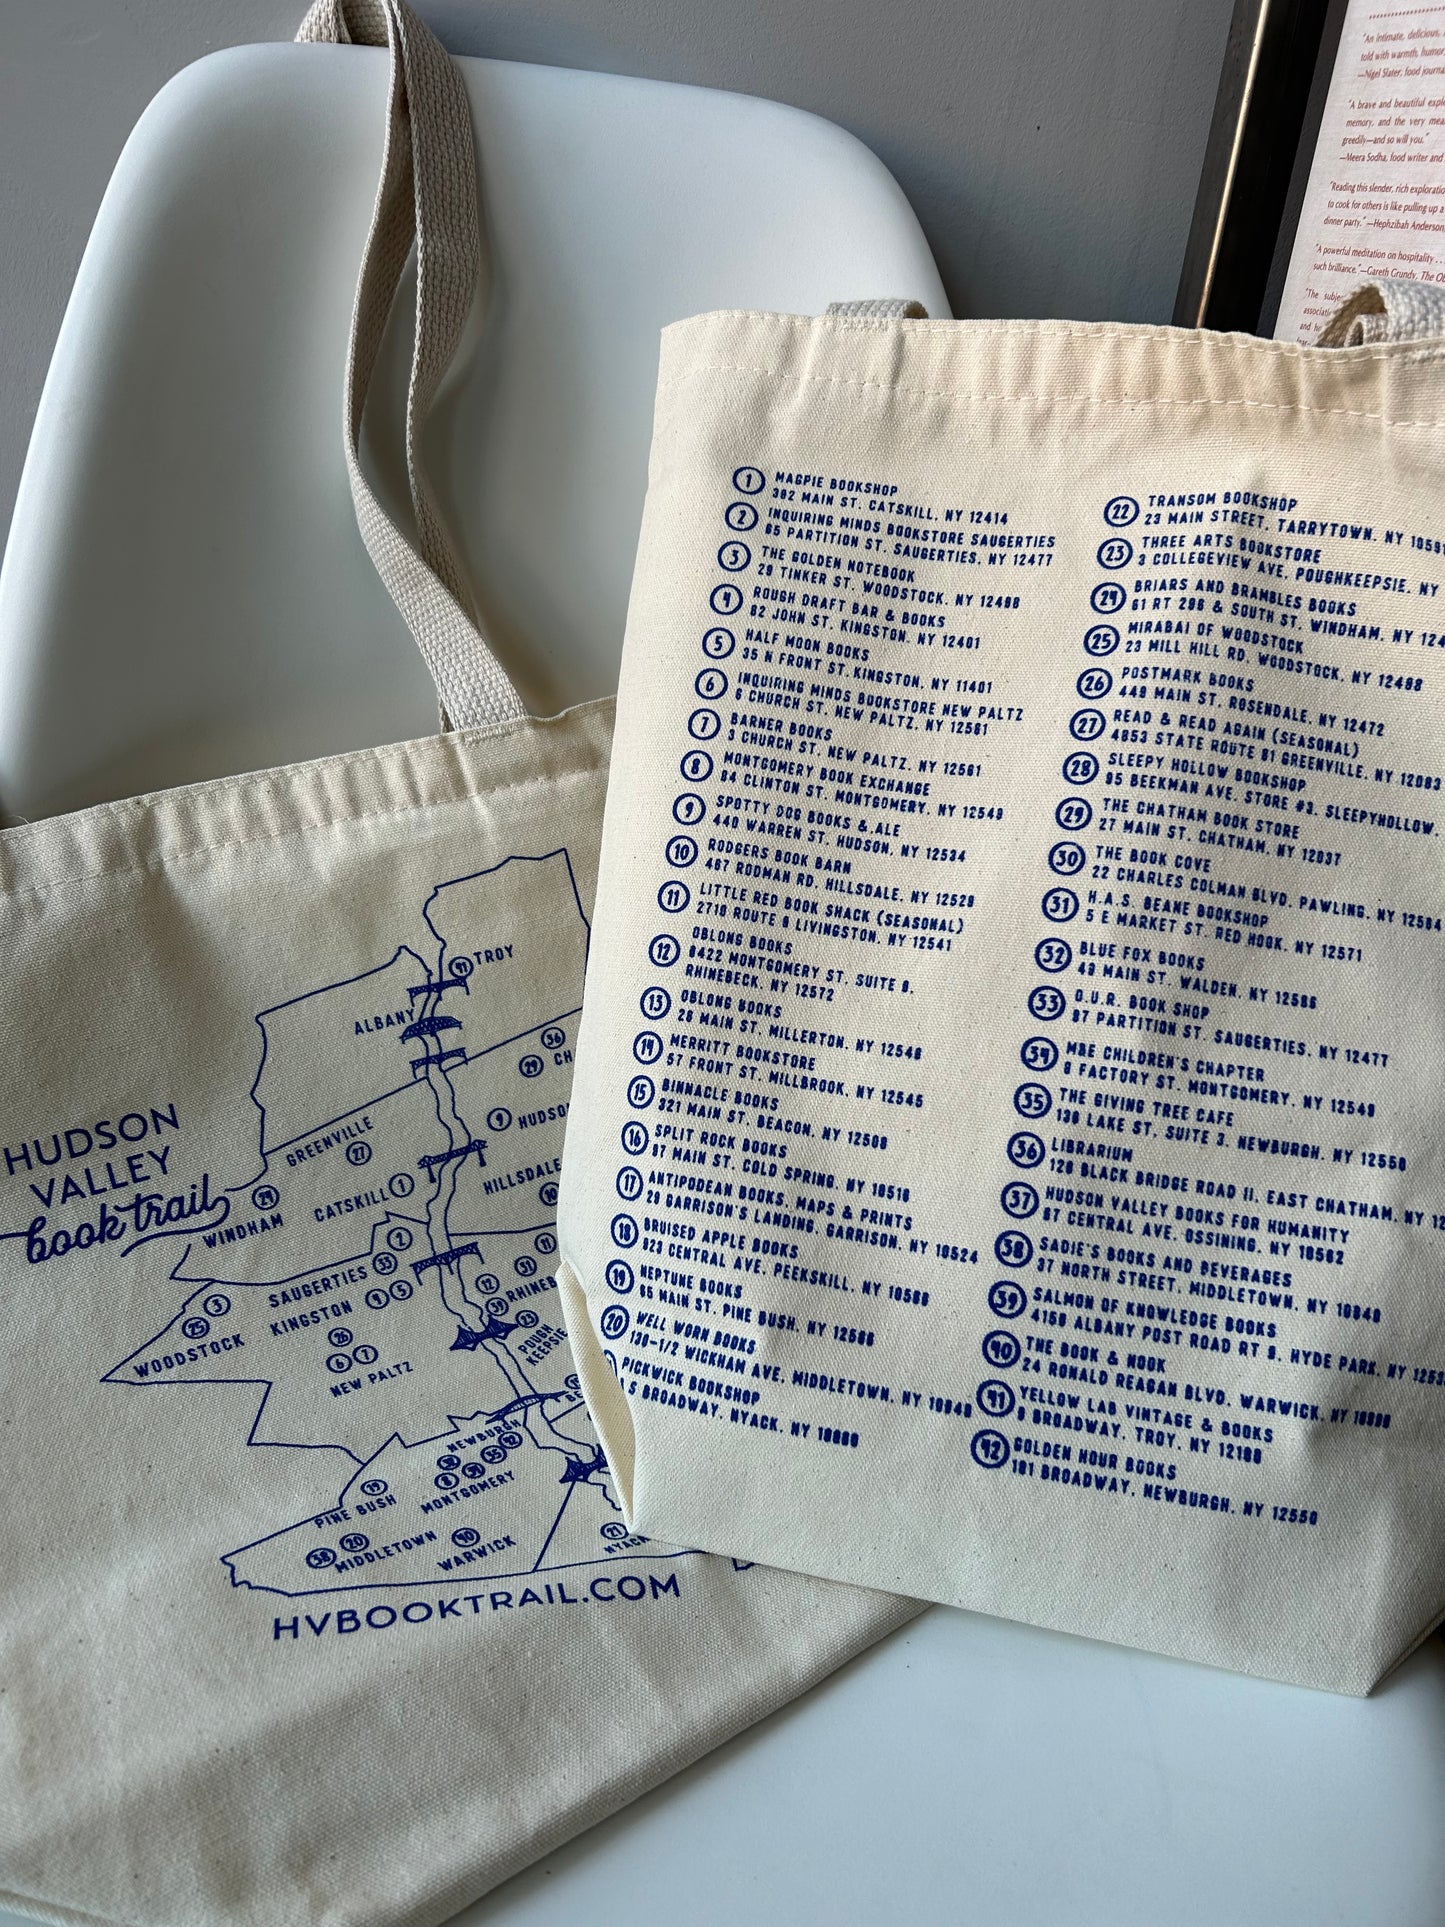 The Hudson Valley Book Trail Tote